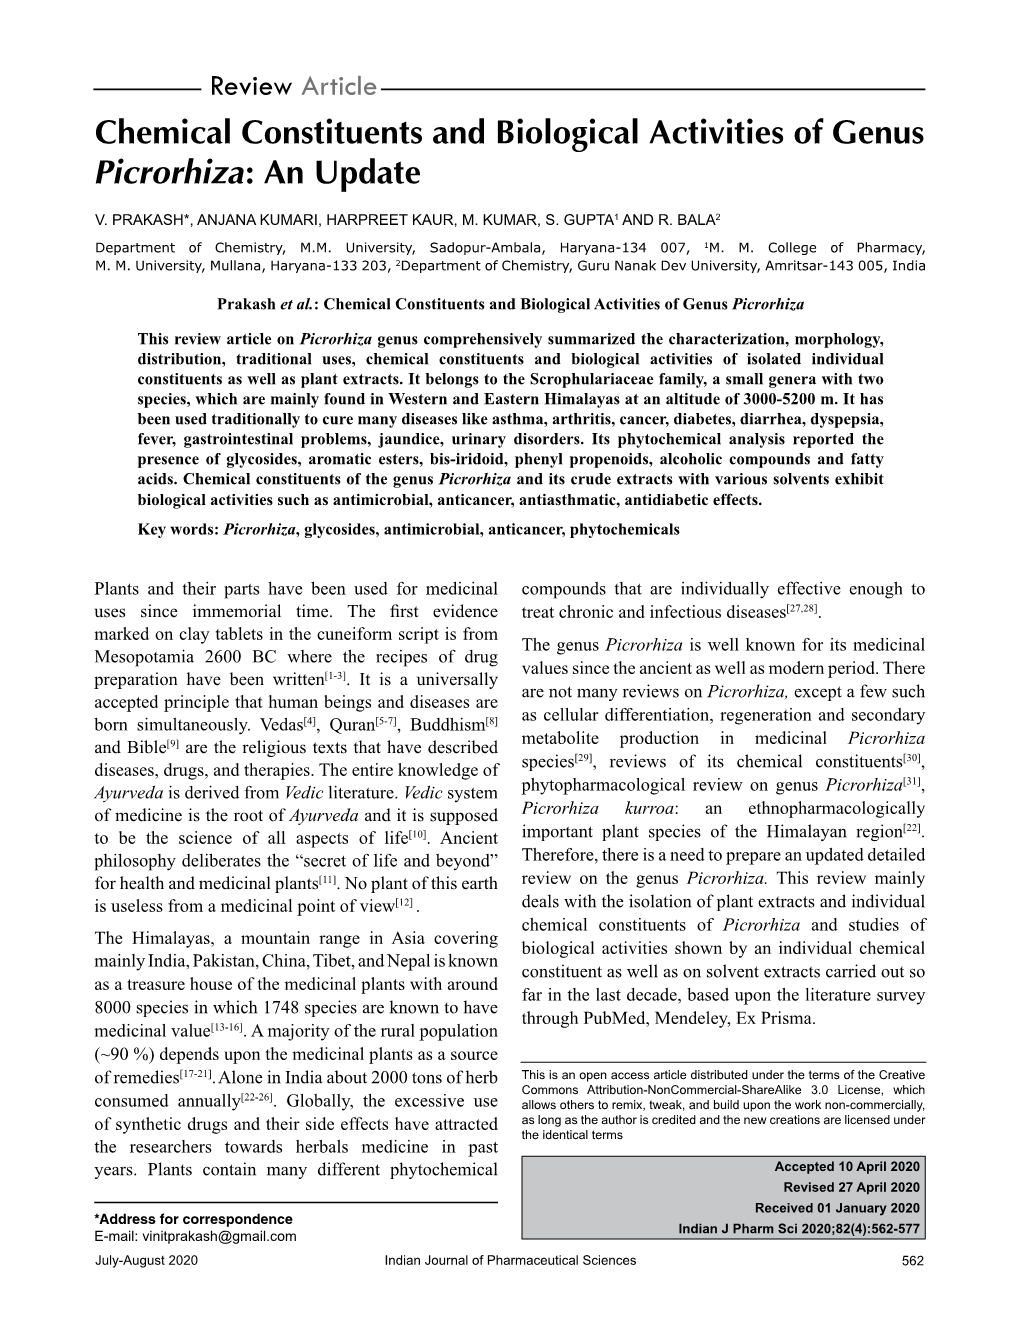 Chemical Constituents and Biological Activities of Genus Picrorhiza: an Update